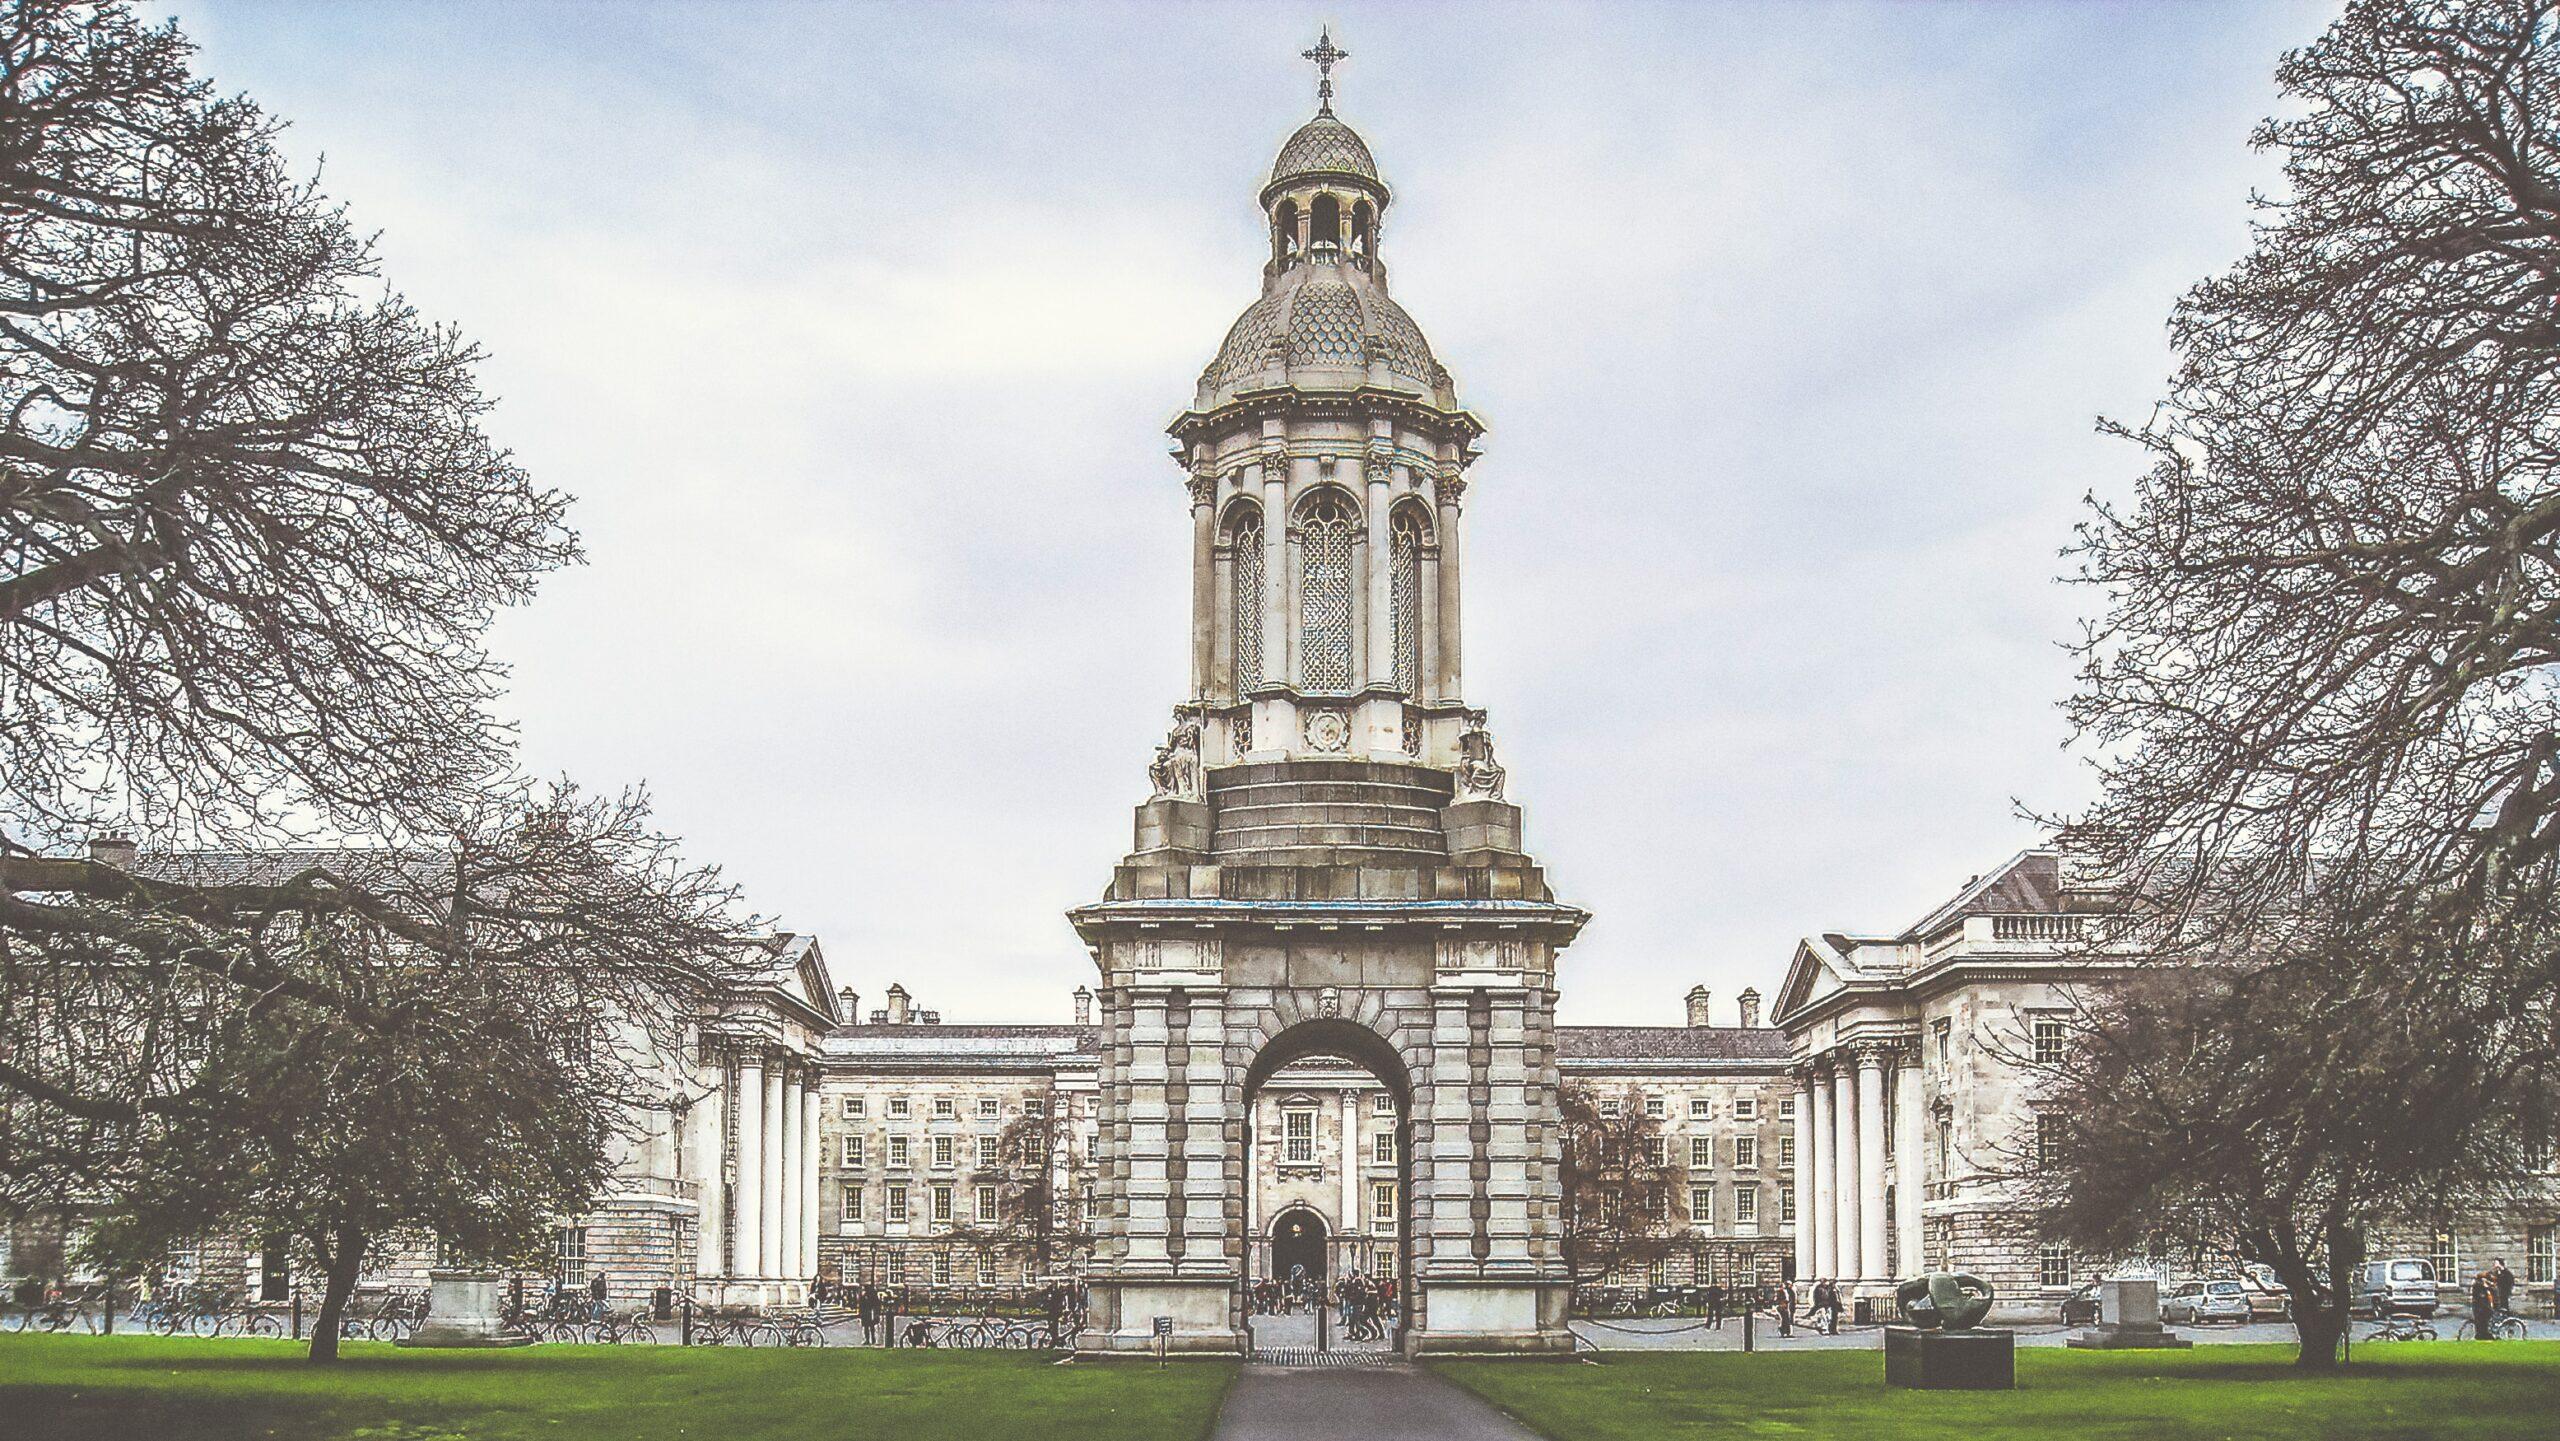 Globetrotter: How to explore Dublin's cultural highlights in 24 hours